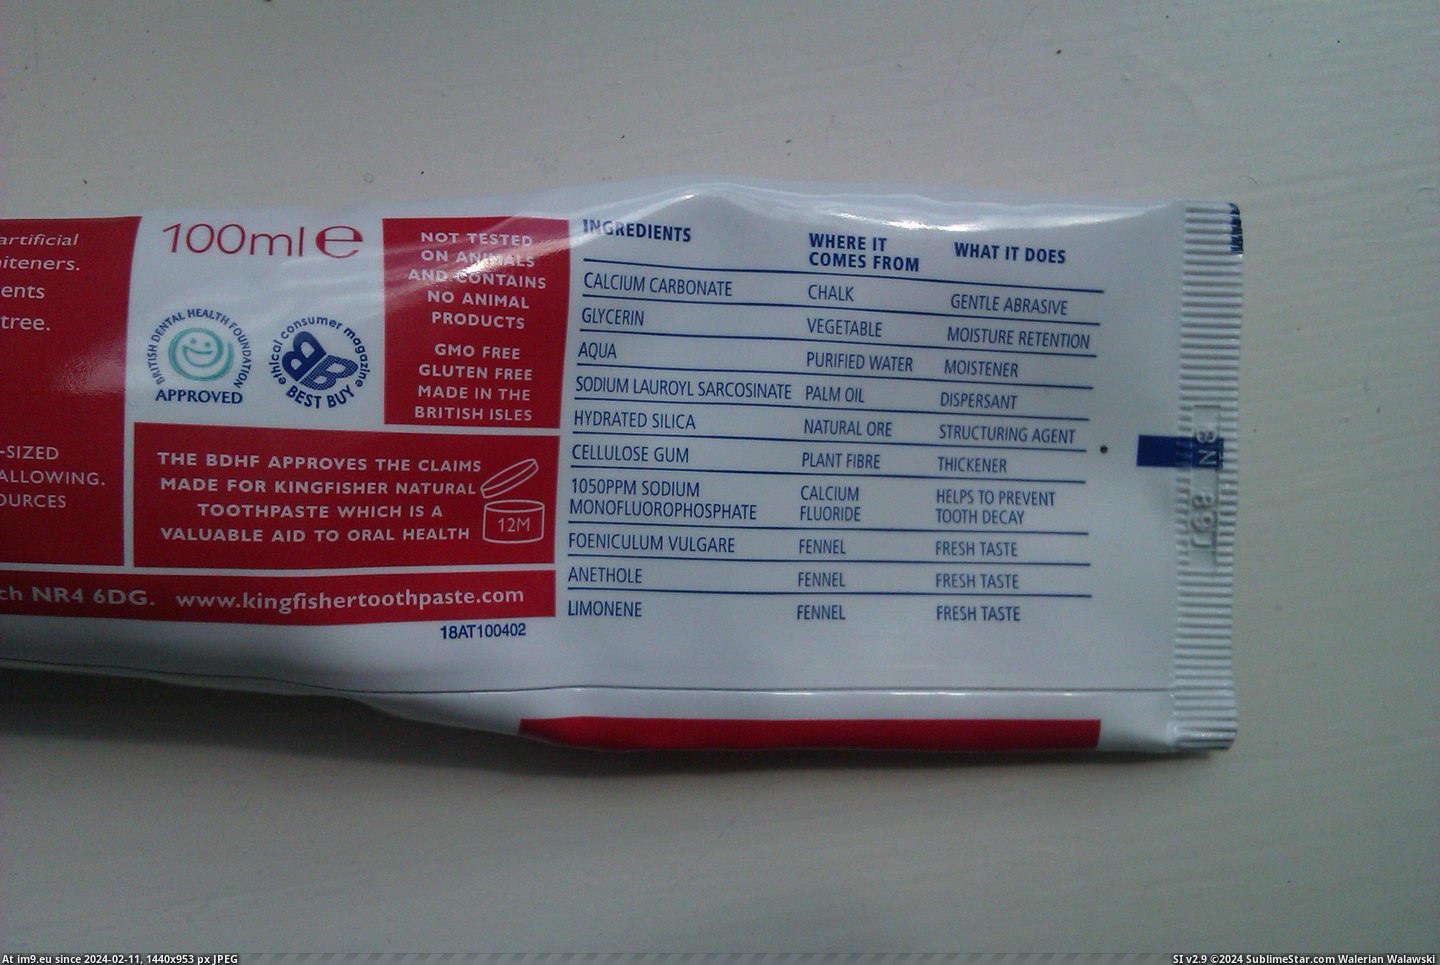 #Explains #Tube #Toothpaste #Section #Ingredients [Mildlyinteresting] The ingredients section on this toothpaste tube explains where each ingredient comes from and what it does Pic. (Image of album My r/MILDLYINTERESTING favs))